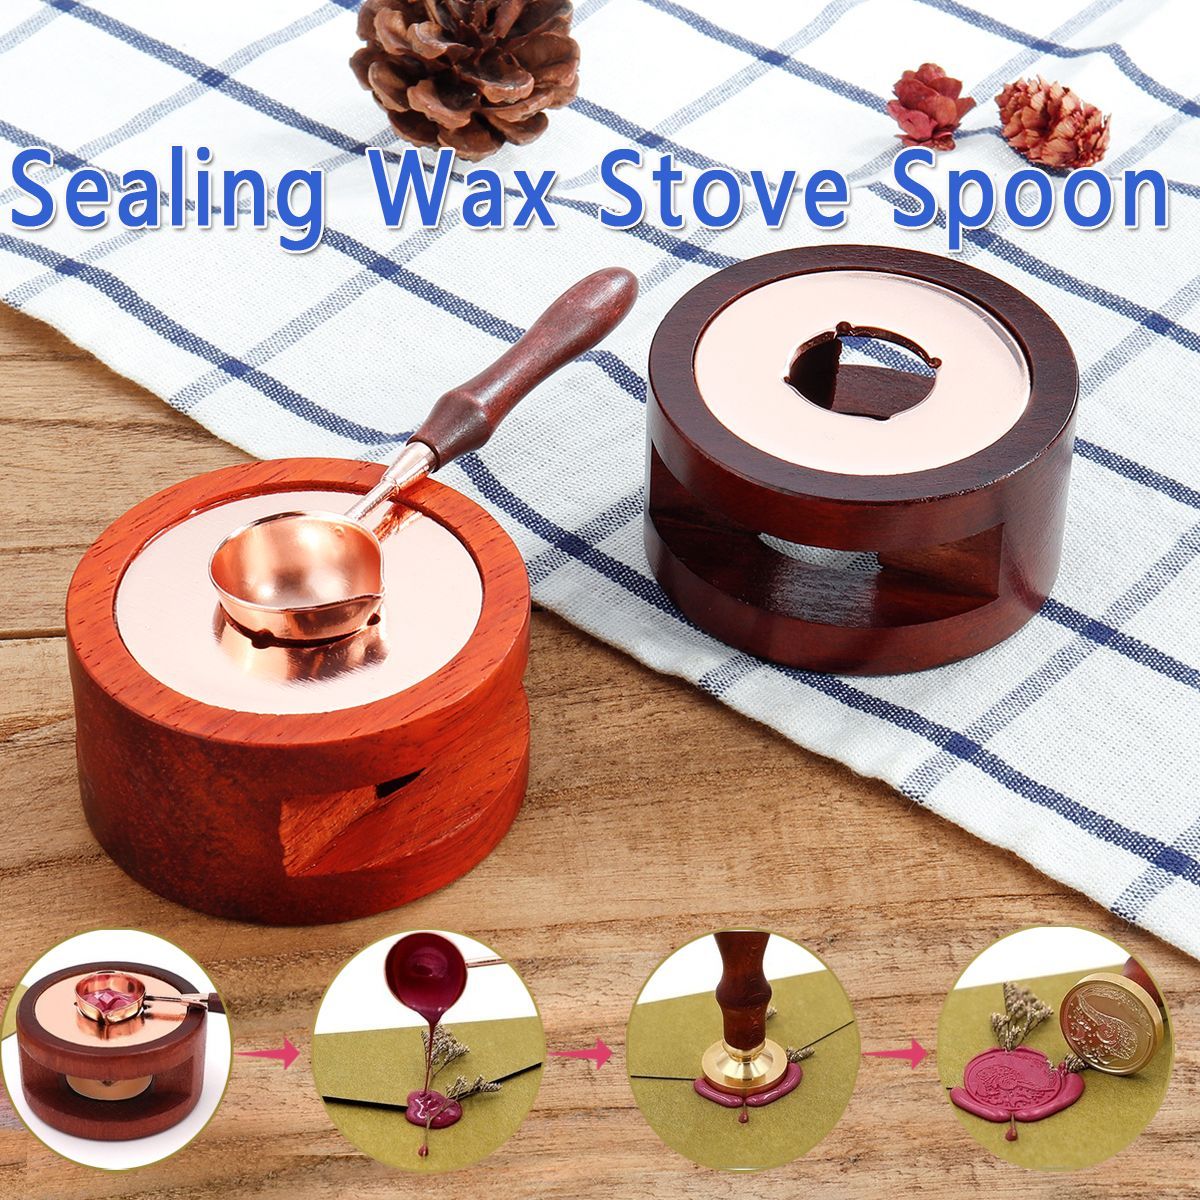 Wood-Wax-Seal-Stamp-Melting-Spoon-Stamp-Warmer-Melting-Furnace-Stove-Pot-Decorations-1592569